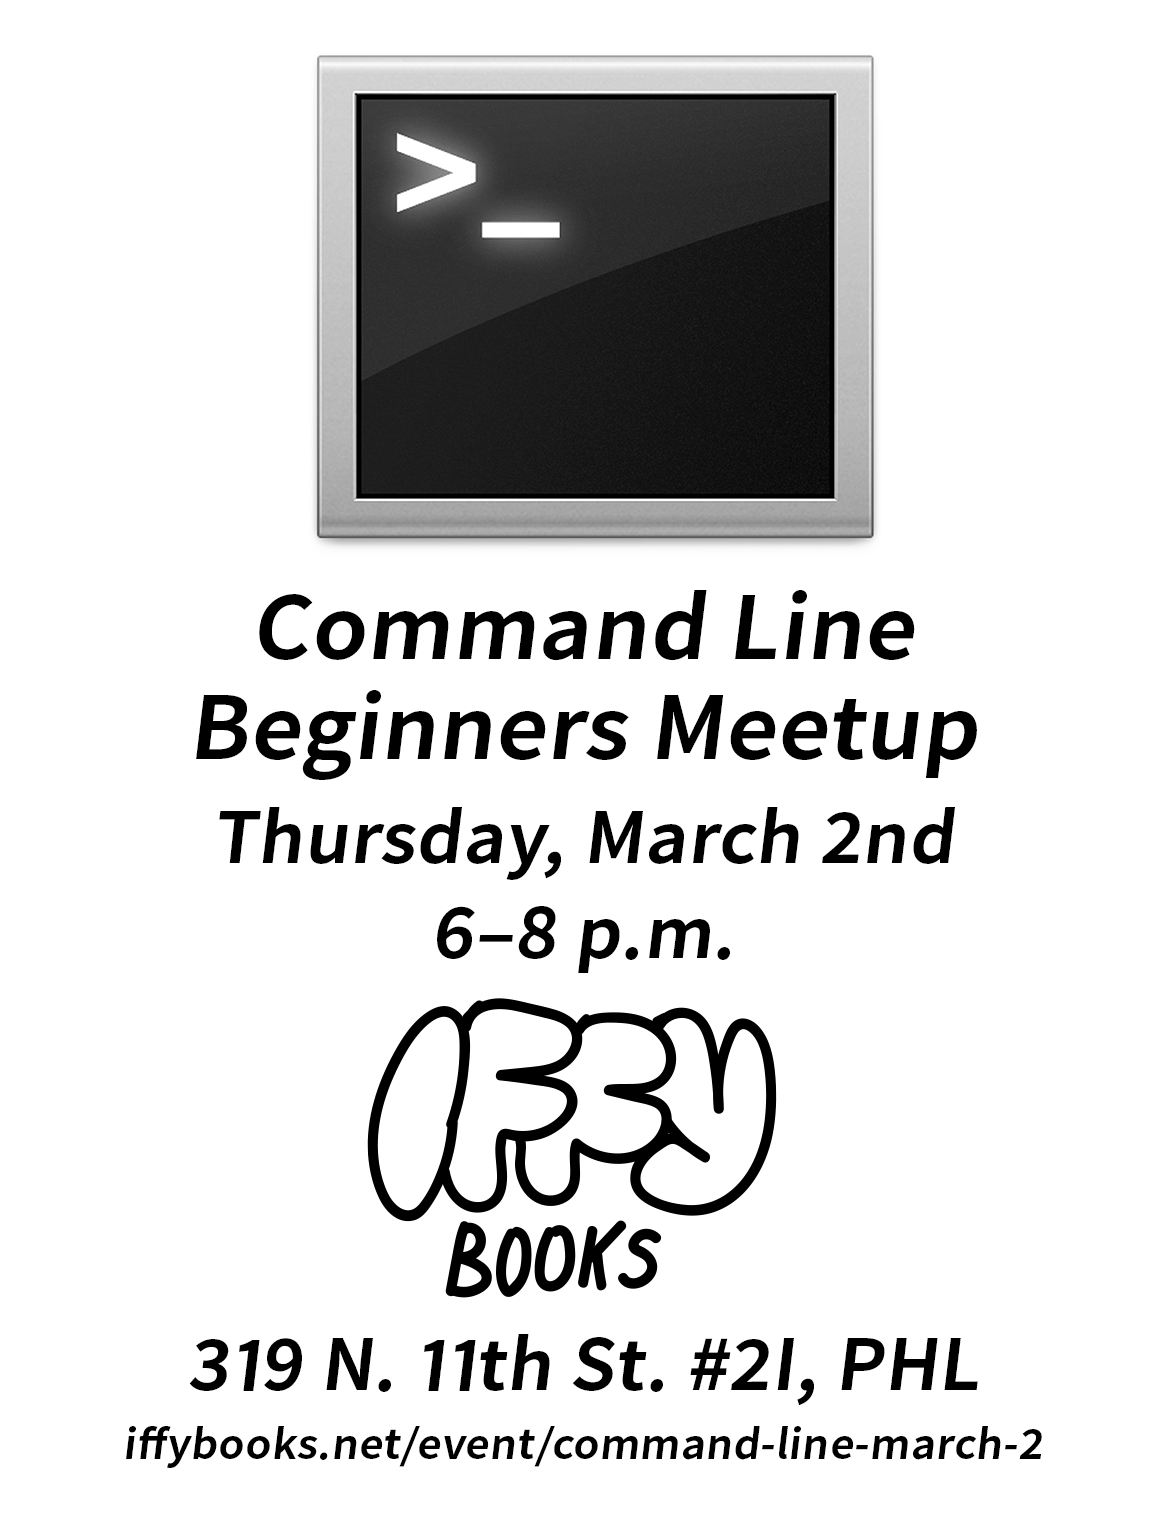 Flyer image with an illustration of a computer terminal window, with the following text: Command Line Beginners Meetup Thursday, March 2nd 6–8 p.m. Iffy Books 319 N. 11th St. #2I iffybooks.net/event/command-line-march-2